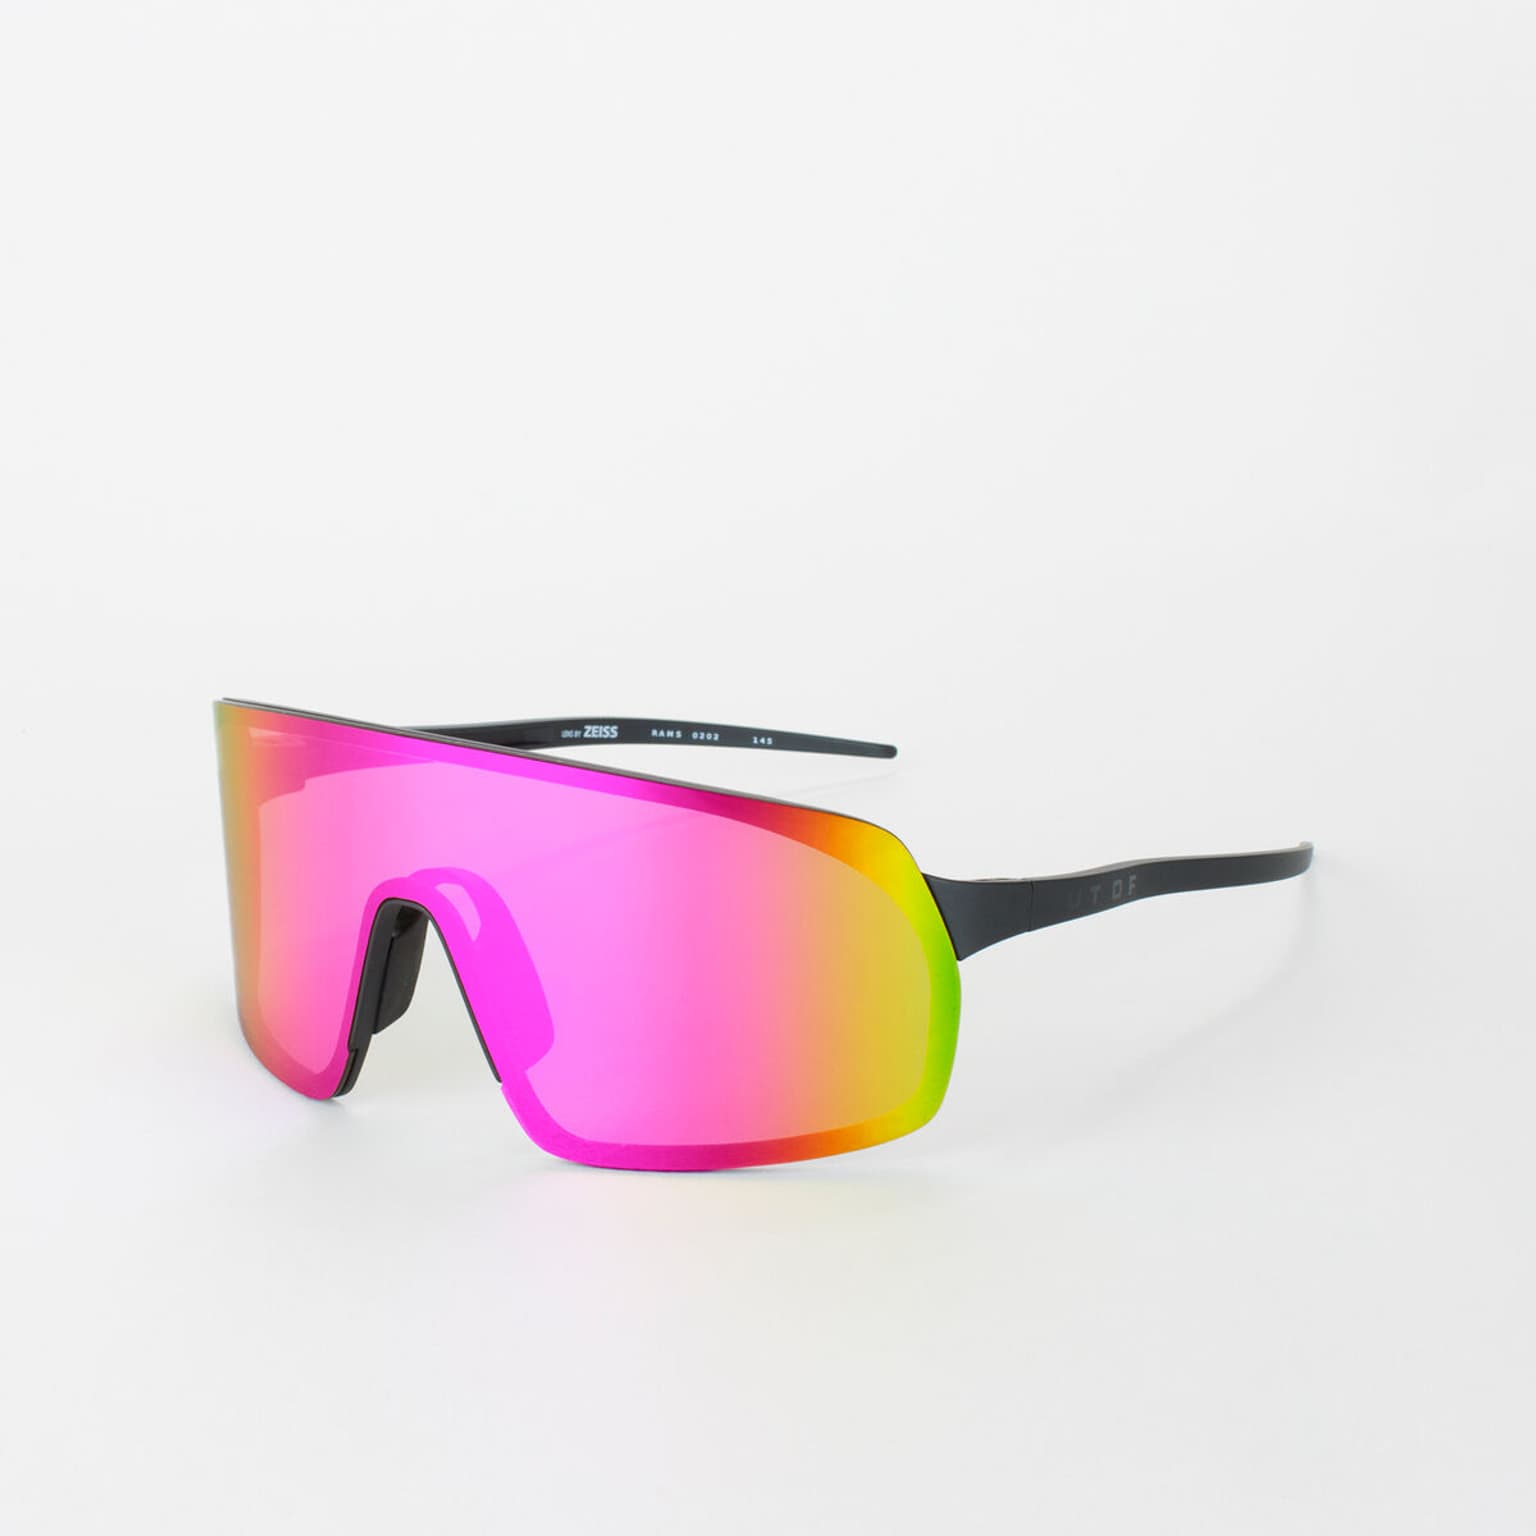 OutOf OutOf RAMS Sportbrille 1